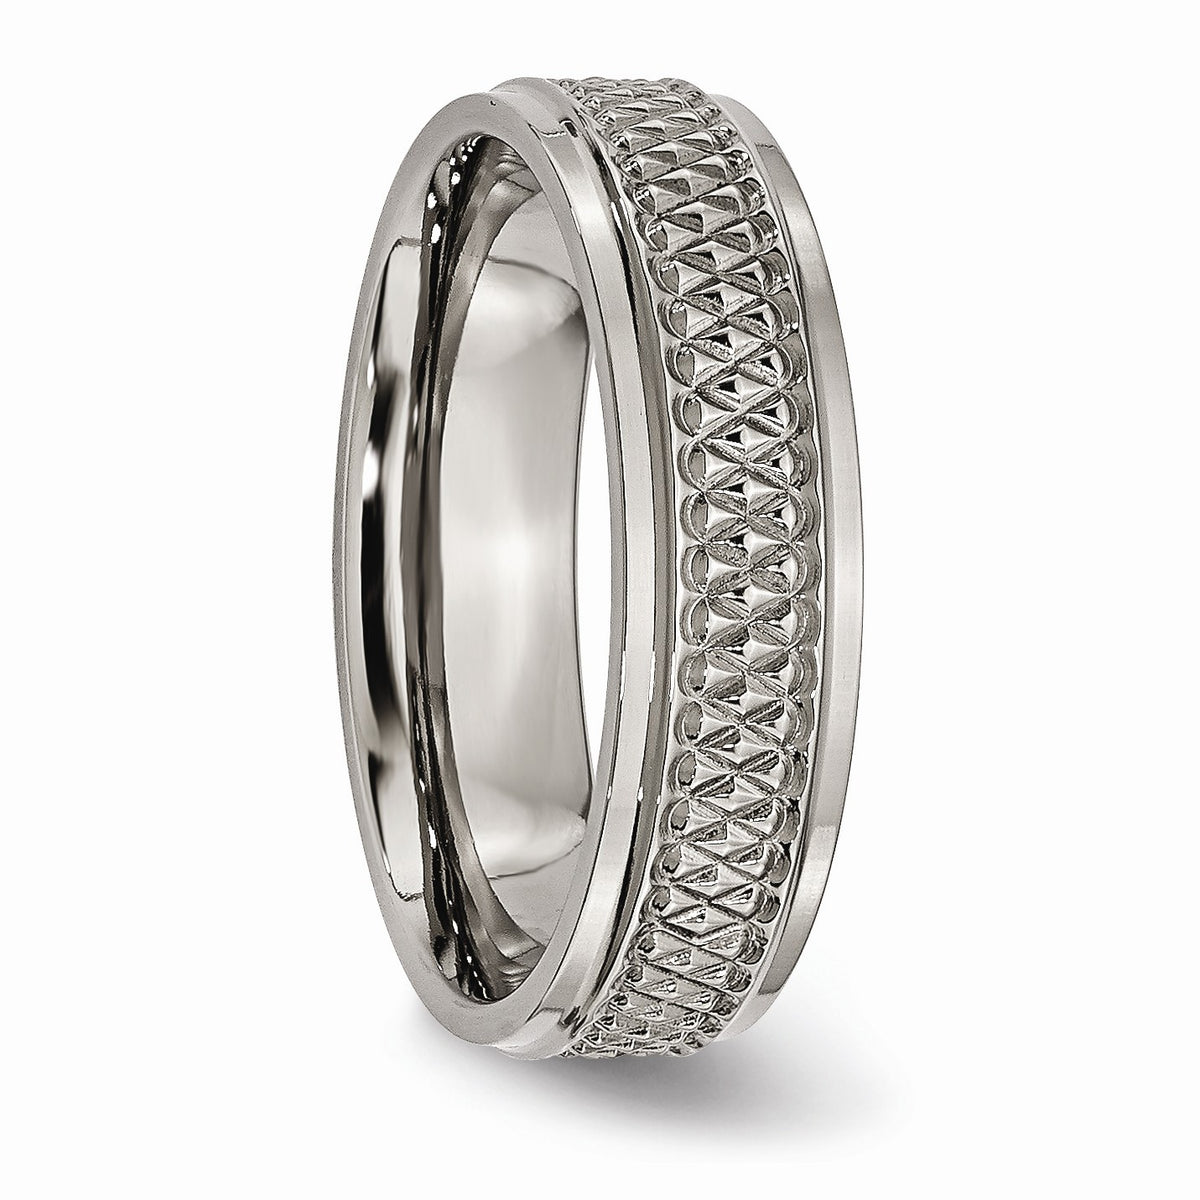 Alternate view of the Titanium 6mm Ridged Edge And Weave Design Comfort Fit Band by The Black Bow Jewelry Co.